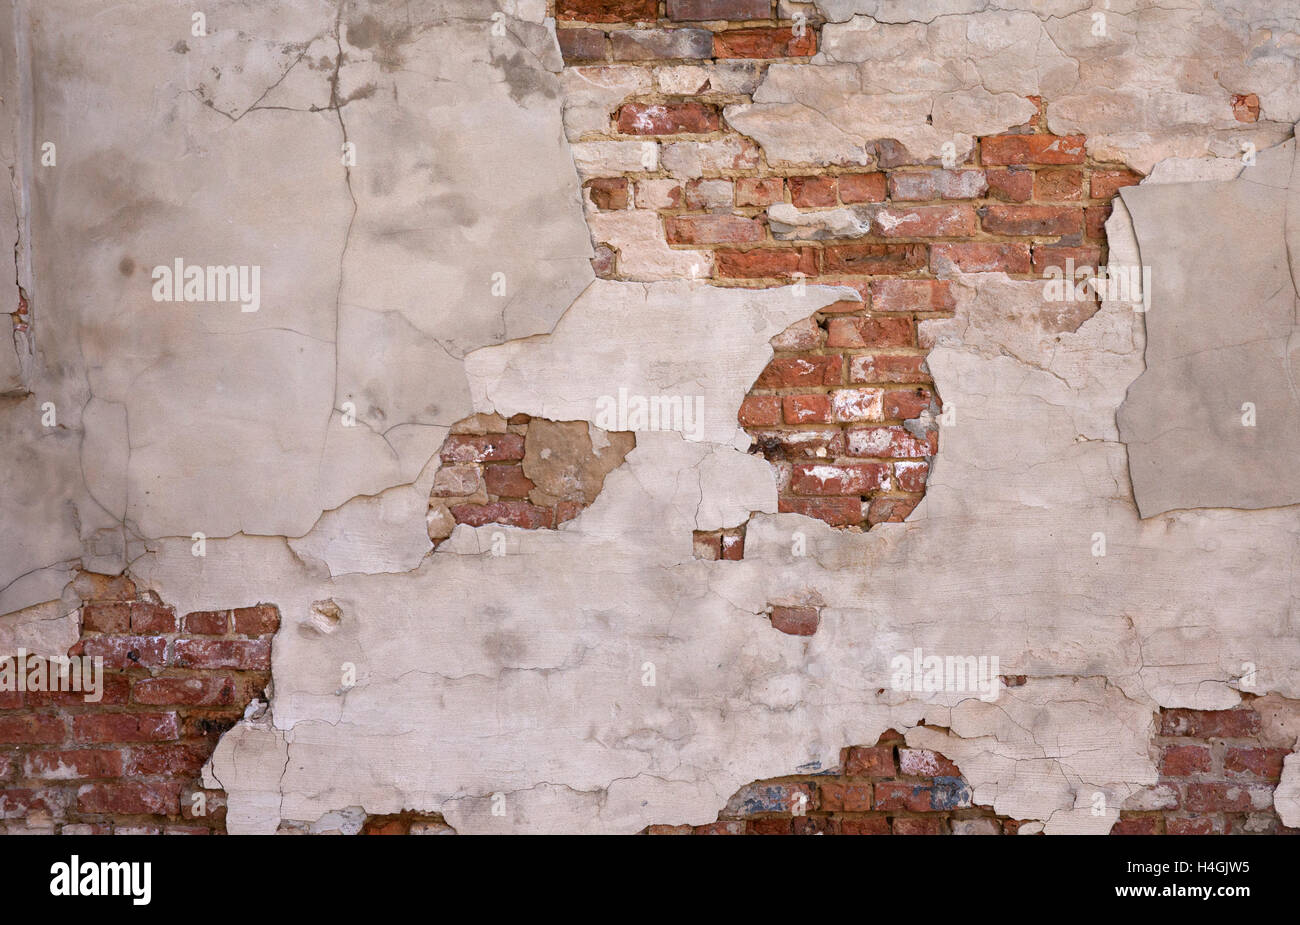 'Painted Wall Background #2'   Painted plastered wall with exposed brick. Stock Photo